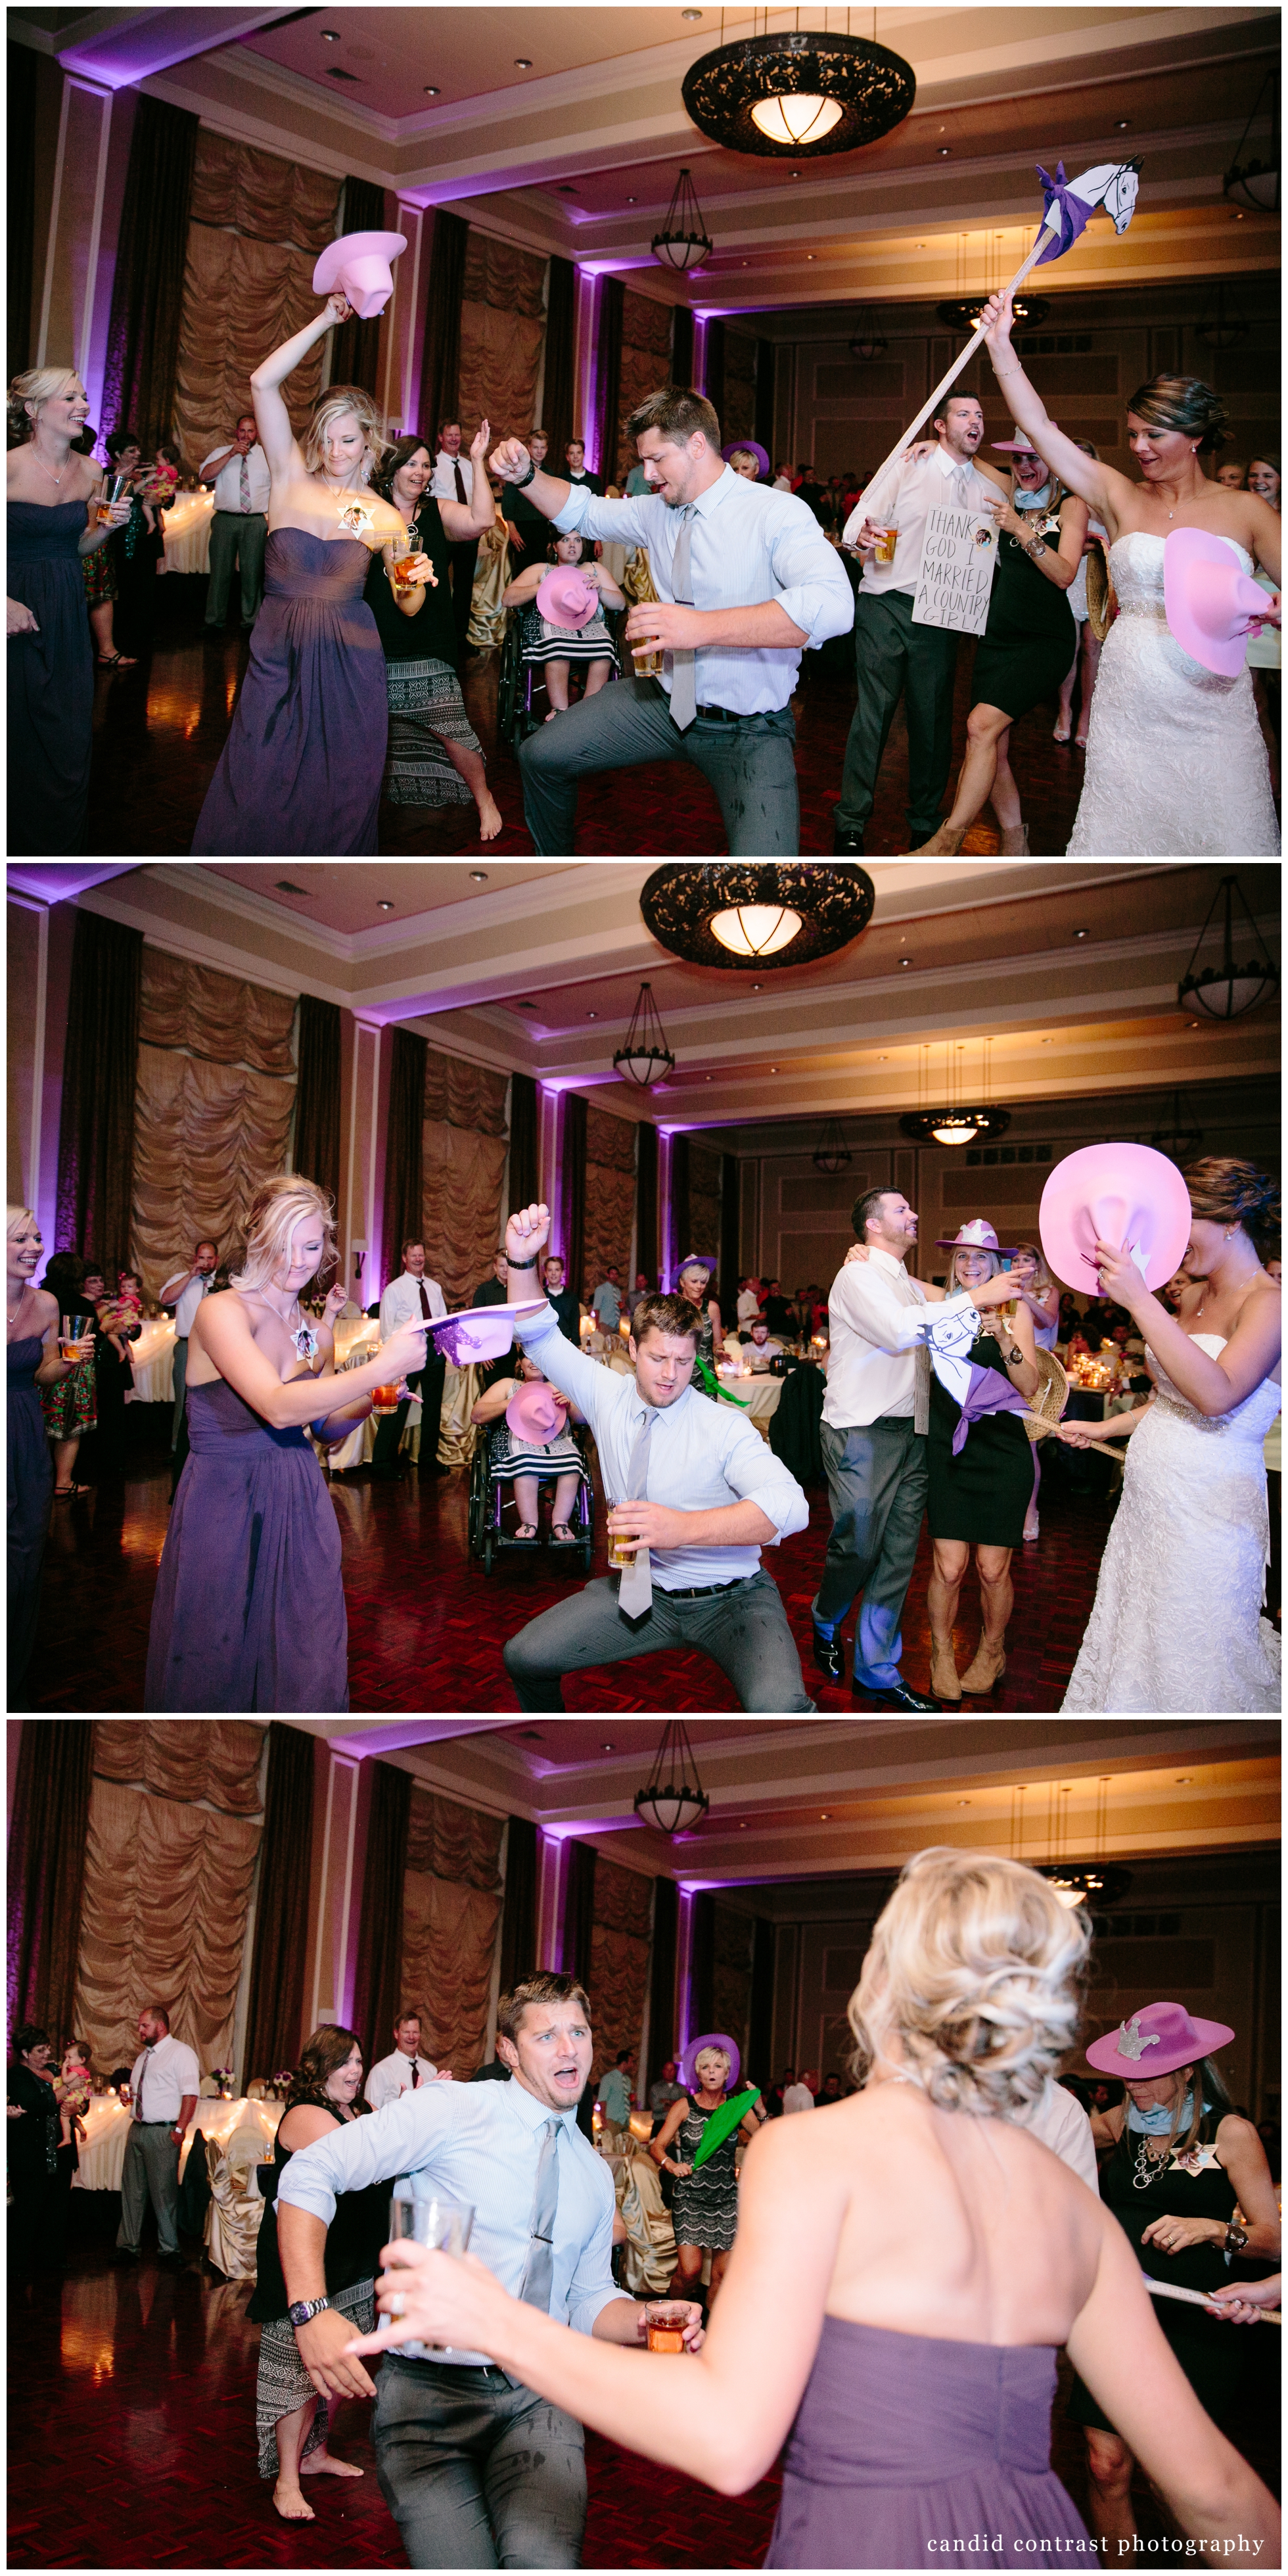 dancing at dubuque ia wedding reception at the hotel julien , candid contrast photography 